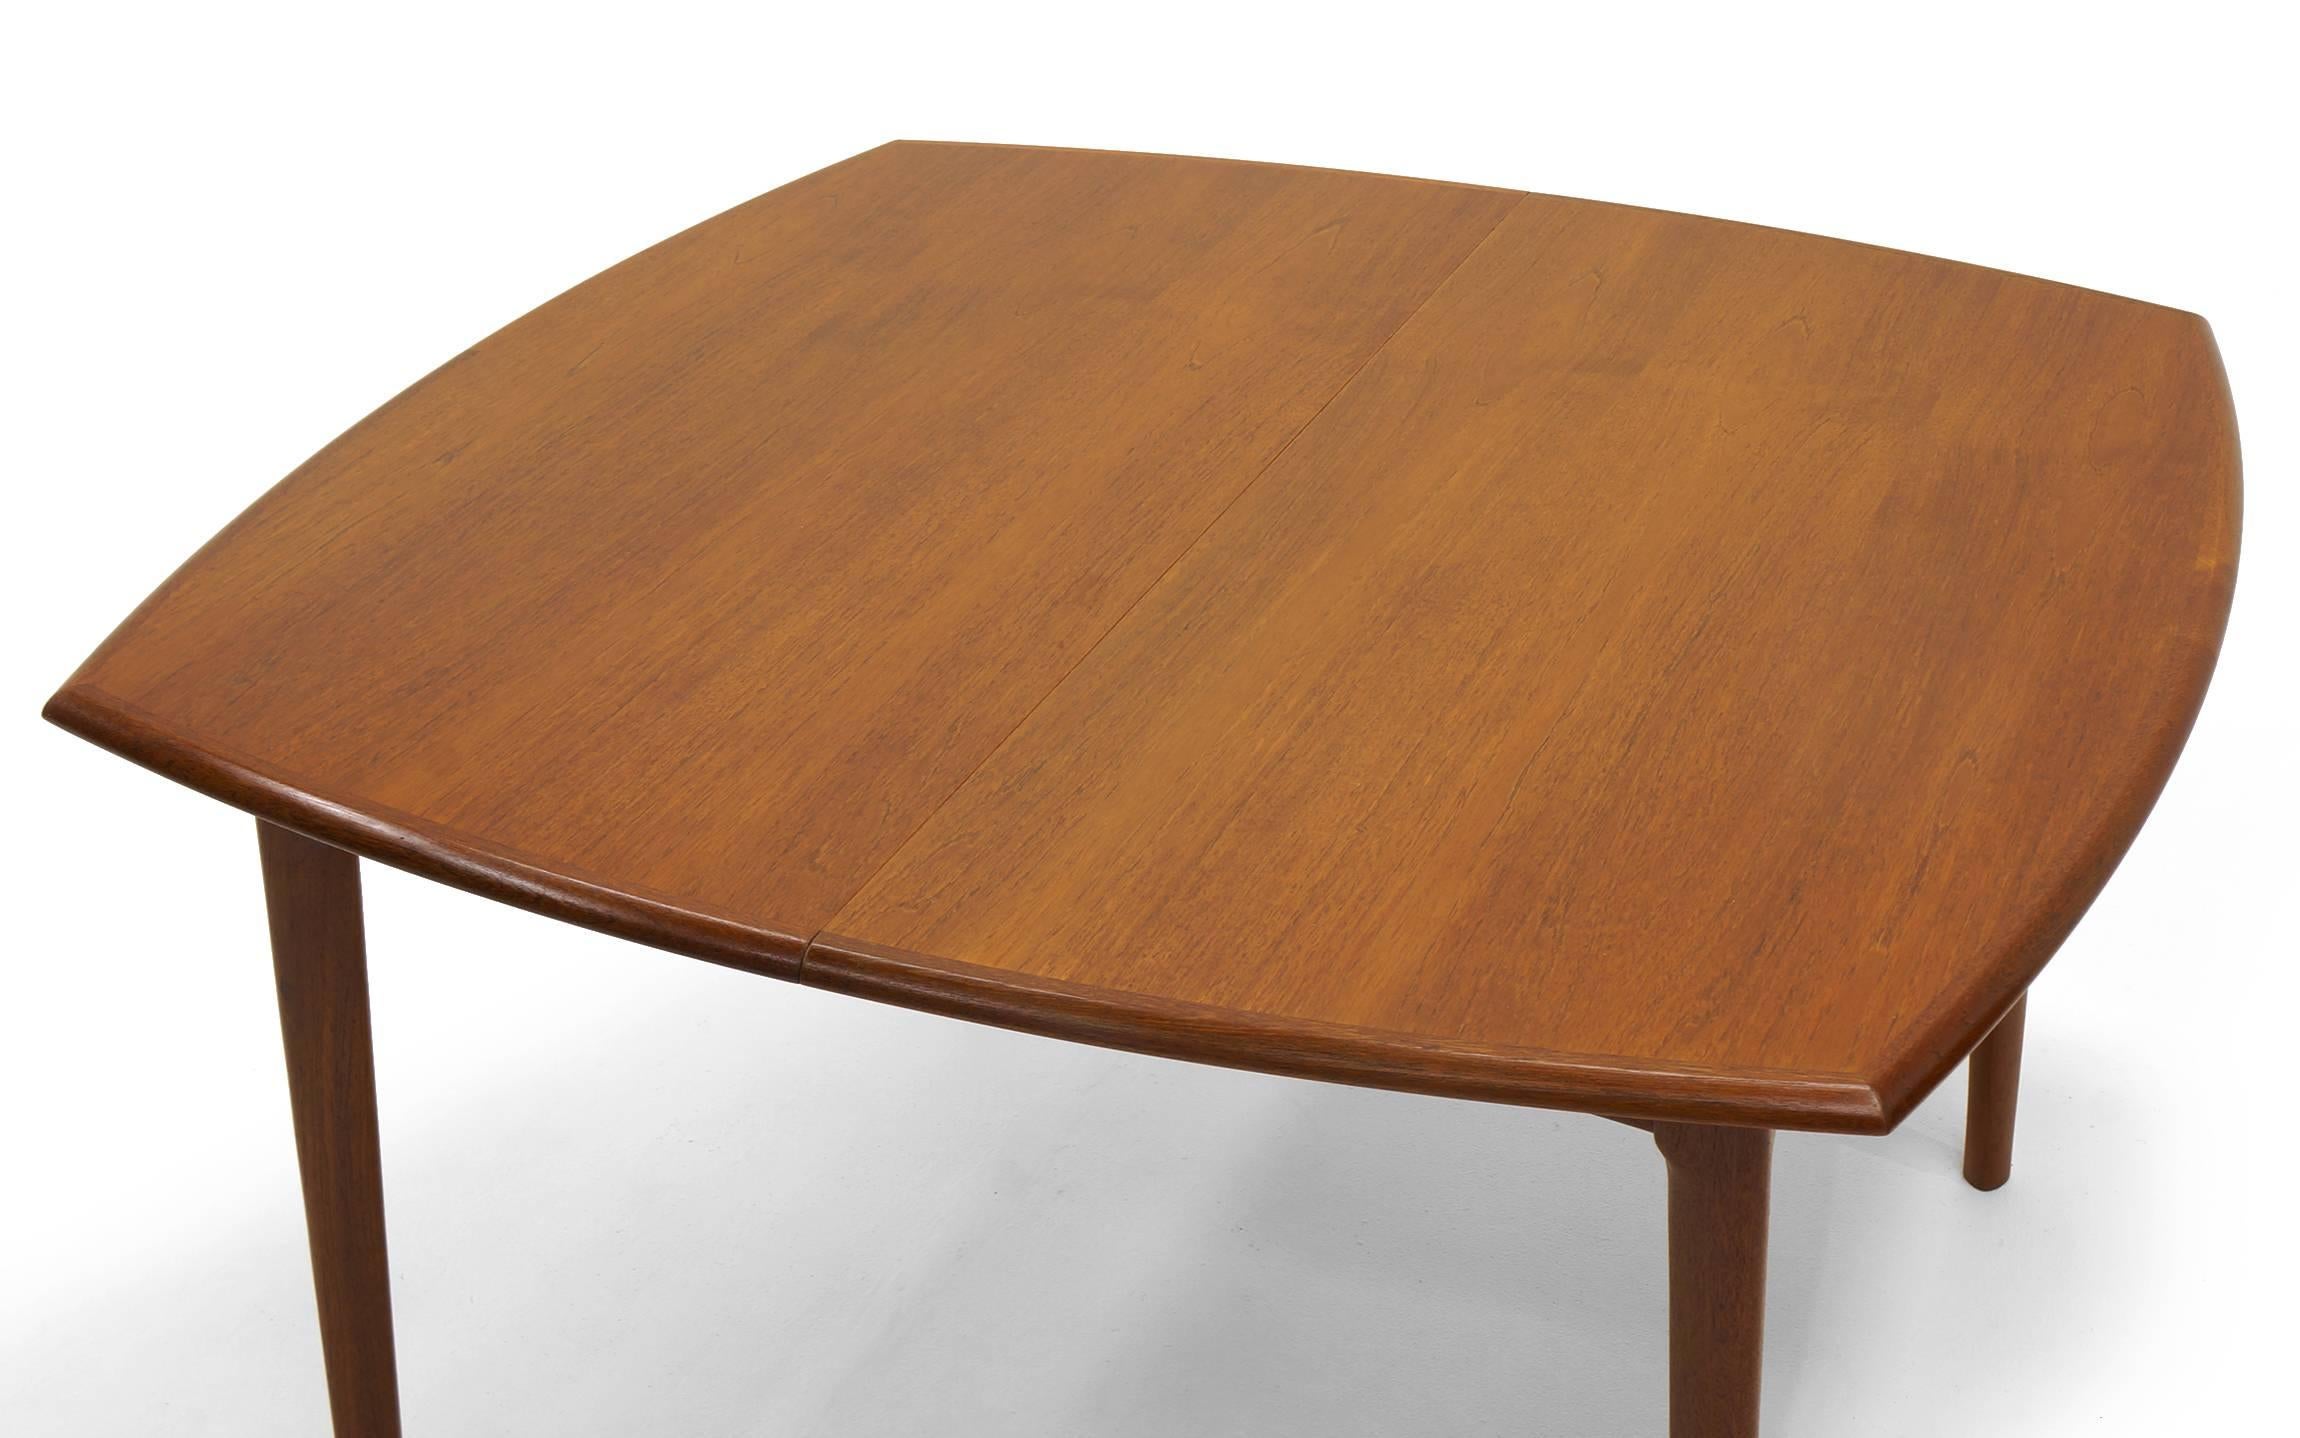 Expandable teak dining table designed by H. W. Klein for Bramin Mobler, Denmark. Starts at 47 inches square and expands to 76 inches and up to 105 inches when both of the 29 inch leaves are in place. Also a drop down center leg for added stability